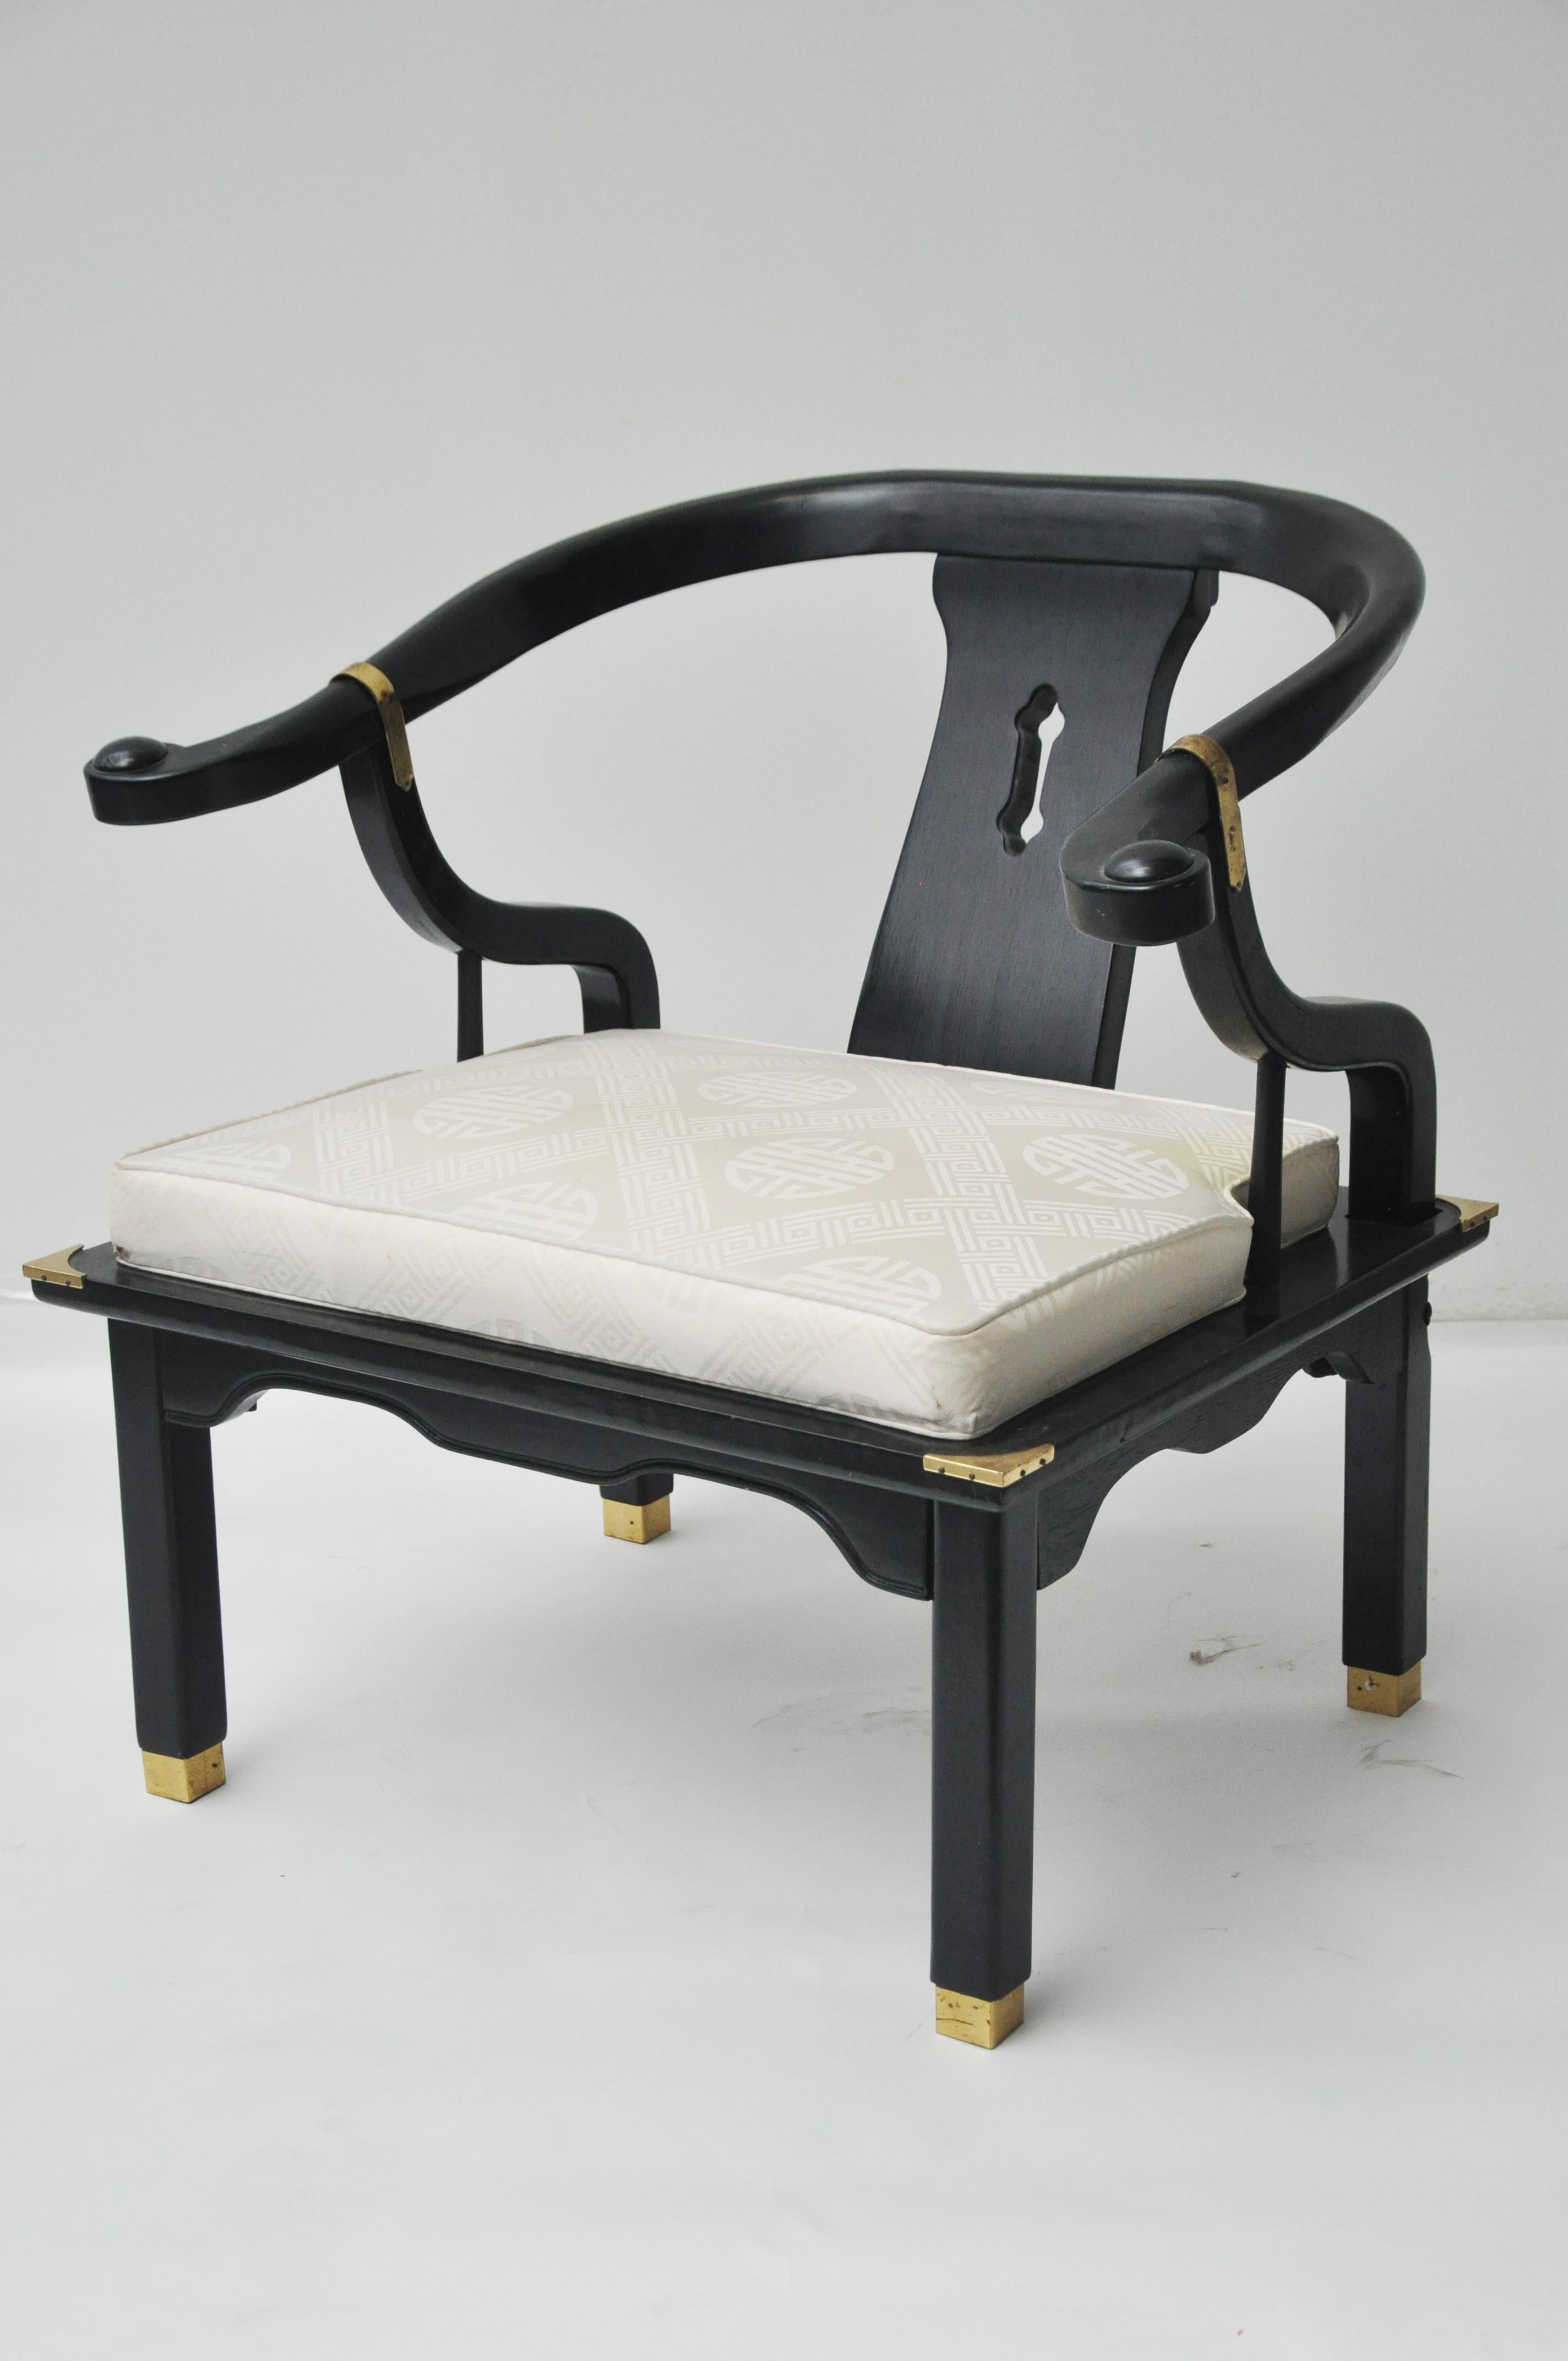 Chinoiserie Style Chinese black horseshoe club chair. Chair has brass detailing. This Ming style chair had a plastic cover over the chair cushion so the fabric is in excellent condition. 
